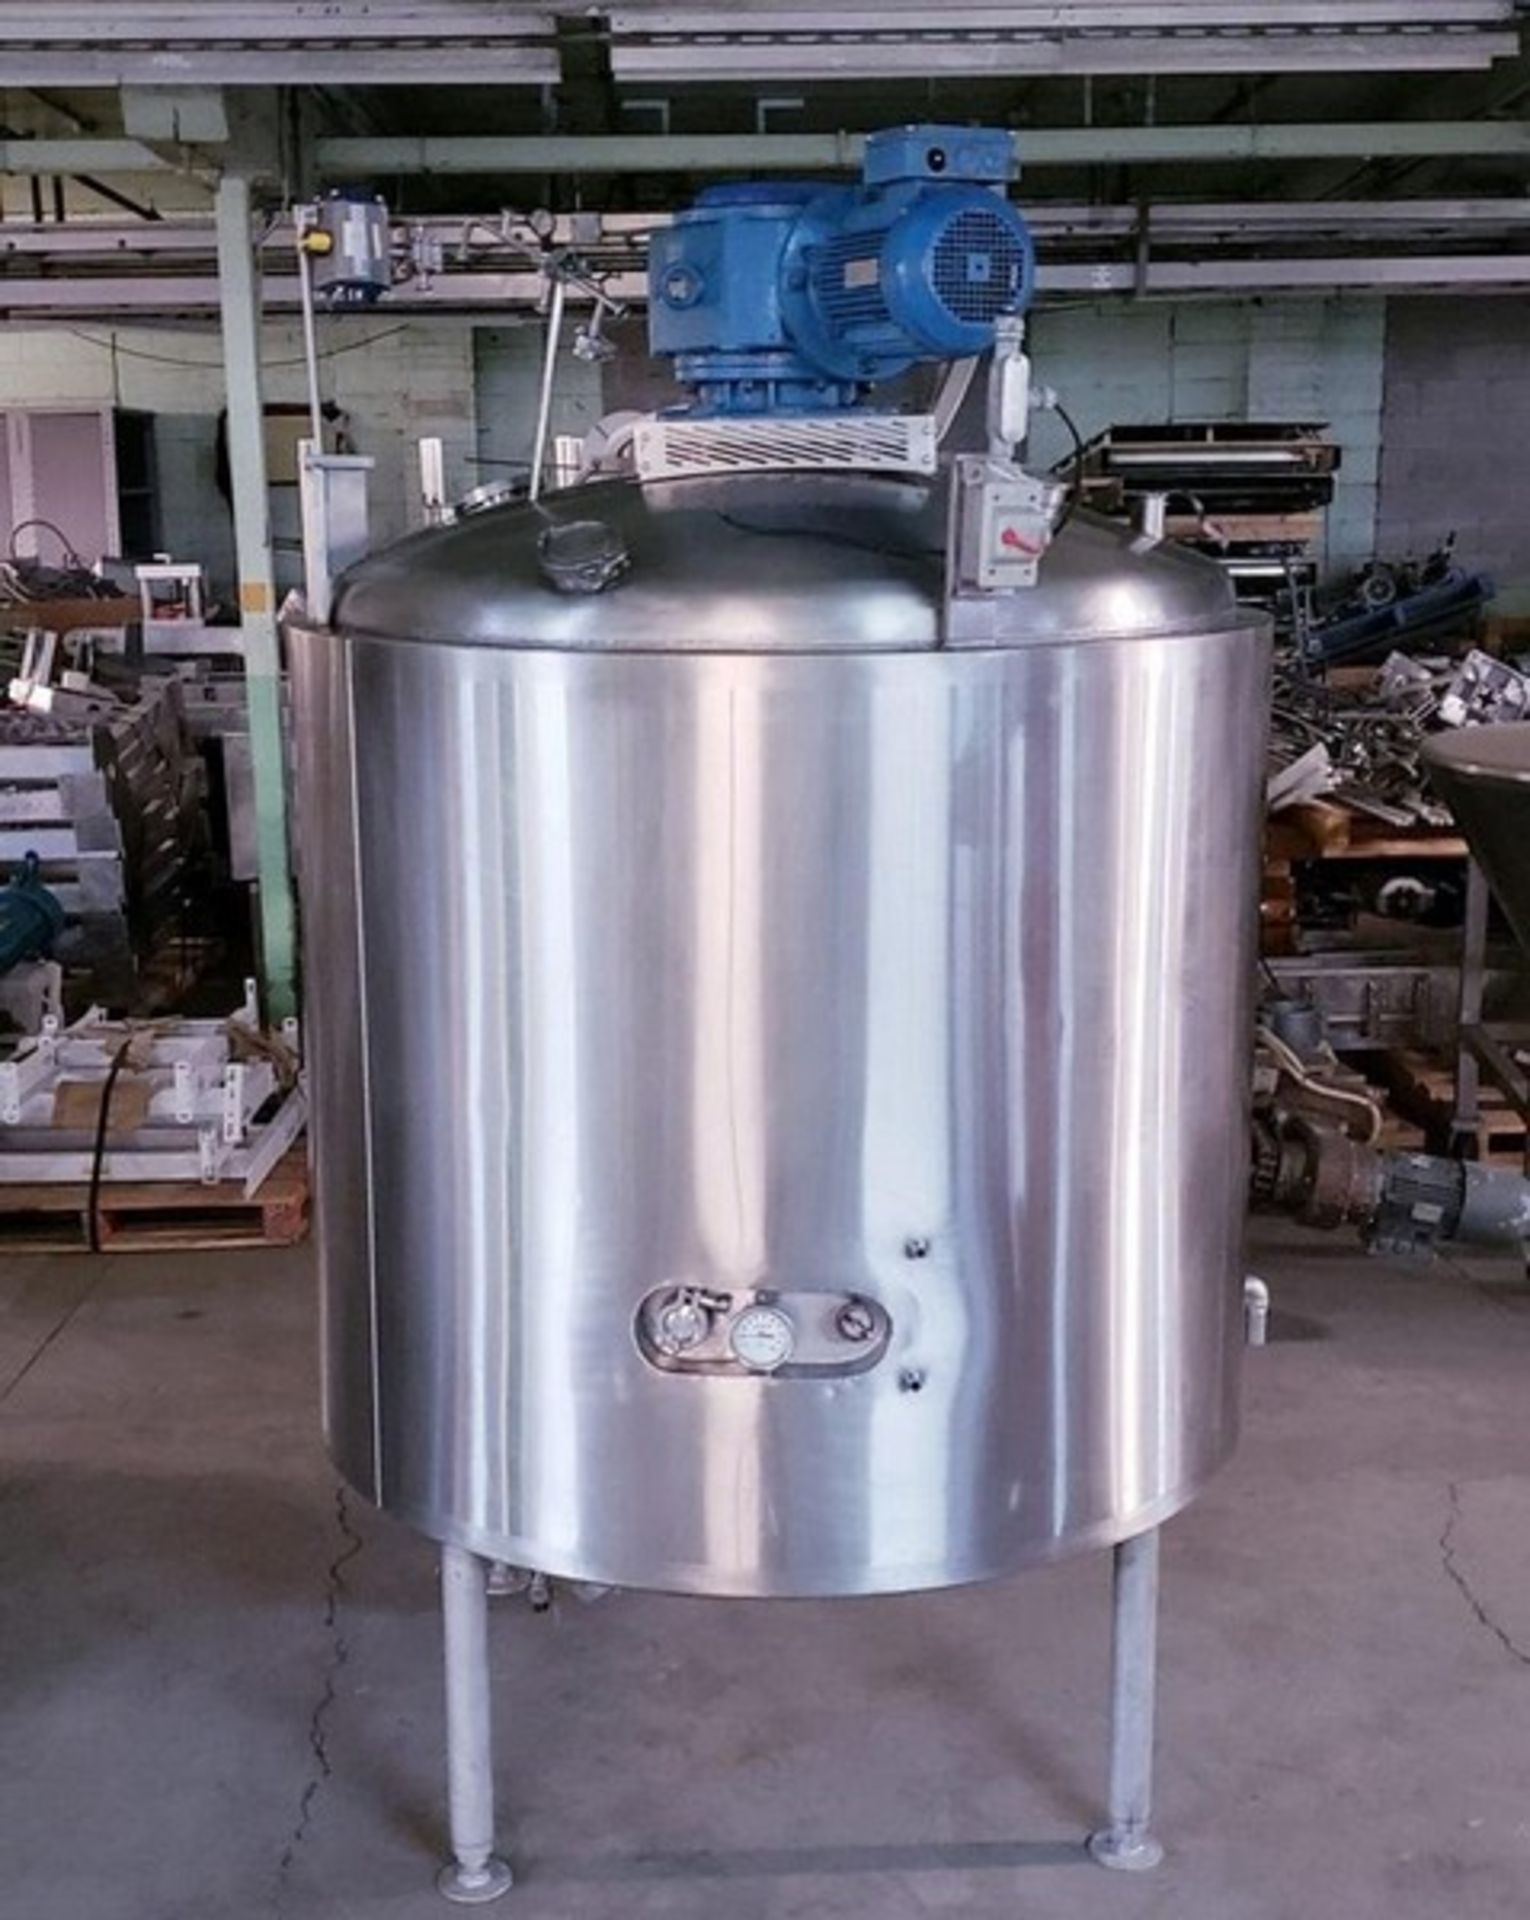 Cooling mixing tank mixer 230-460 volts 3 phase 316 Stainless Steel 500 gallons (Item #102T) (Simple - Image 2 of 5